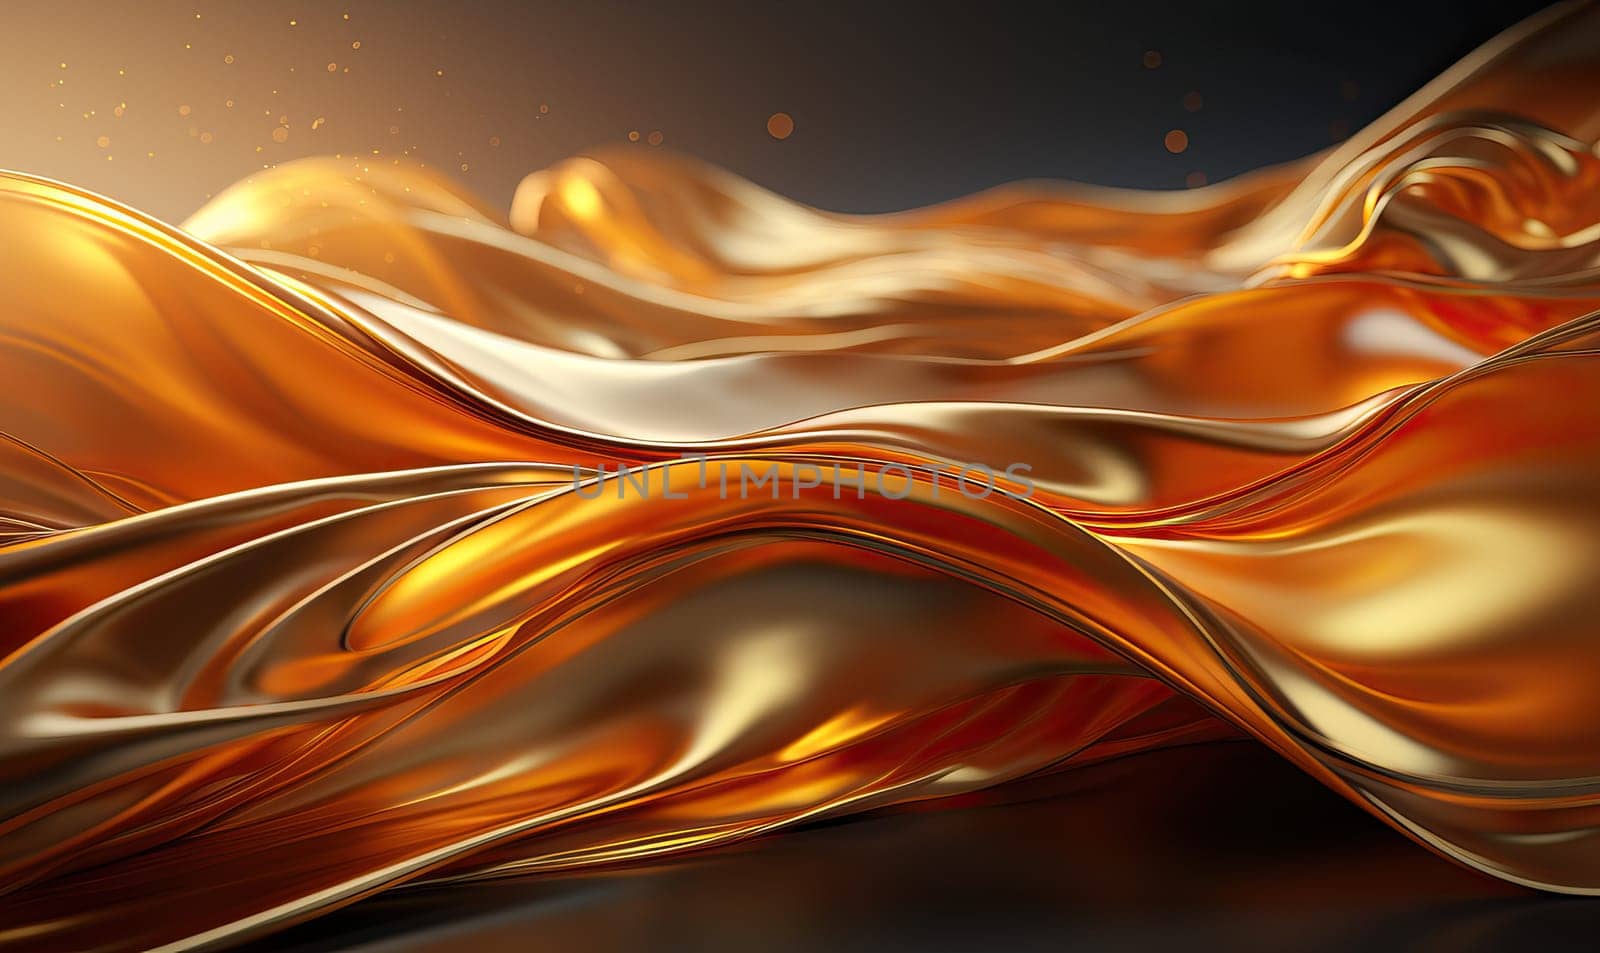 Creative of shiny elegant gold color and luxury wave elements. by Fischeron